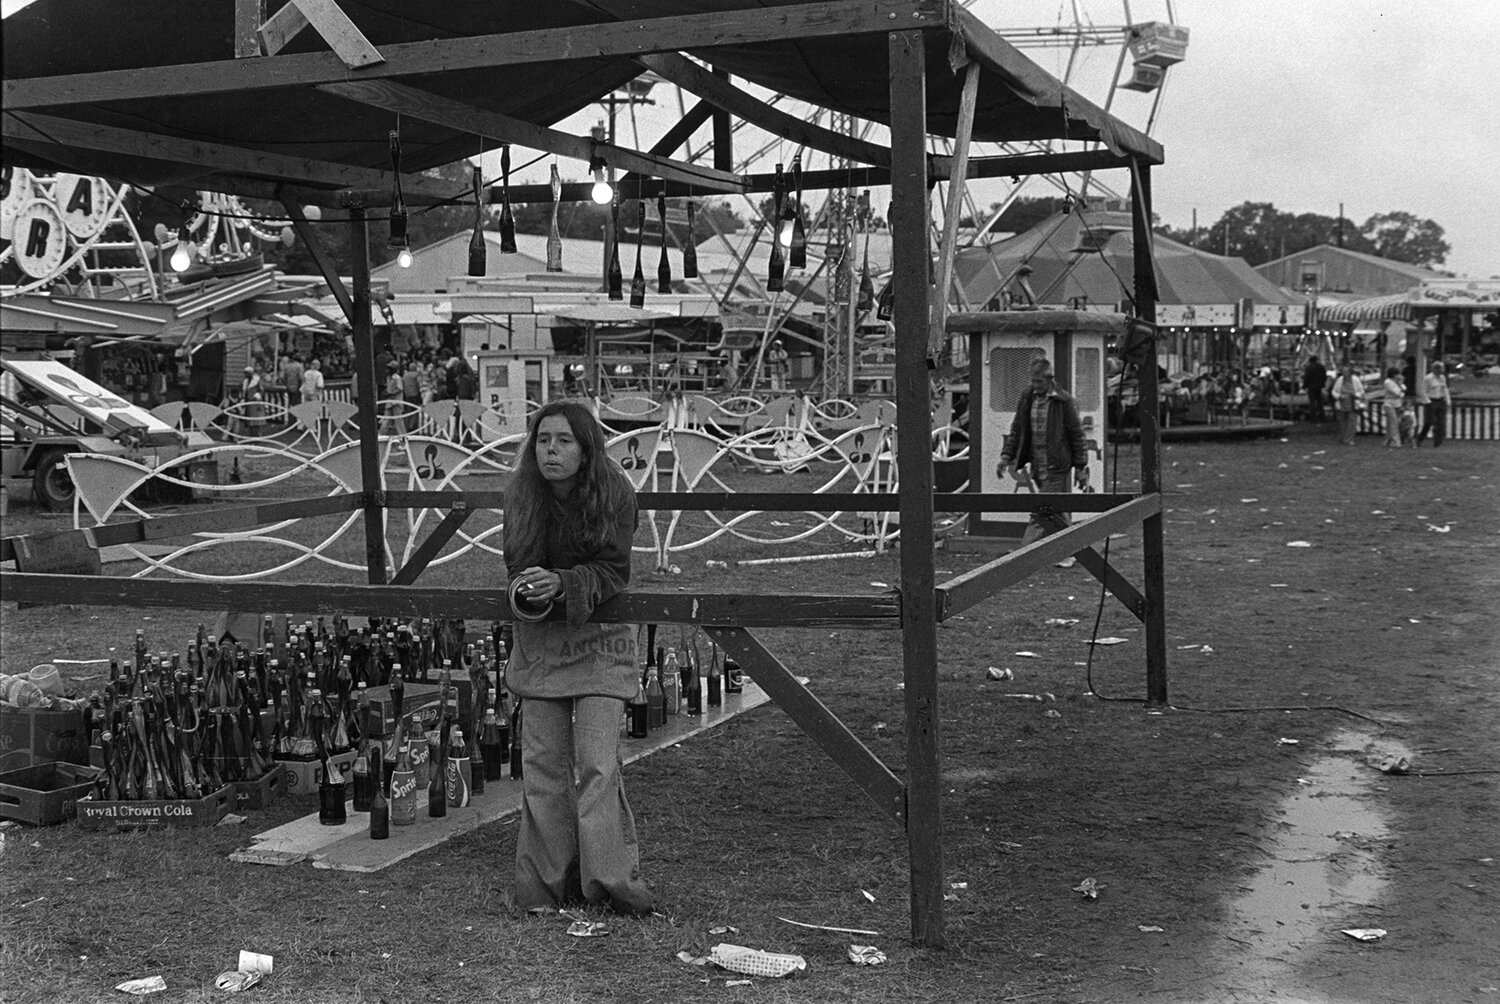   Decatur County Fair , 1976/ Printed: 1977 Silver Gelatin Print 9 1/4 × 13 in. (image size) The Do Good Fund, Inc., 2017-53 